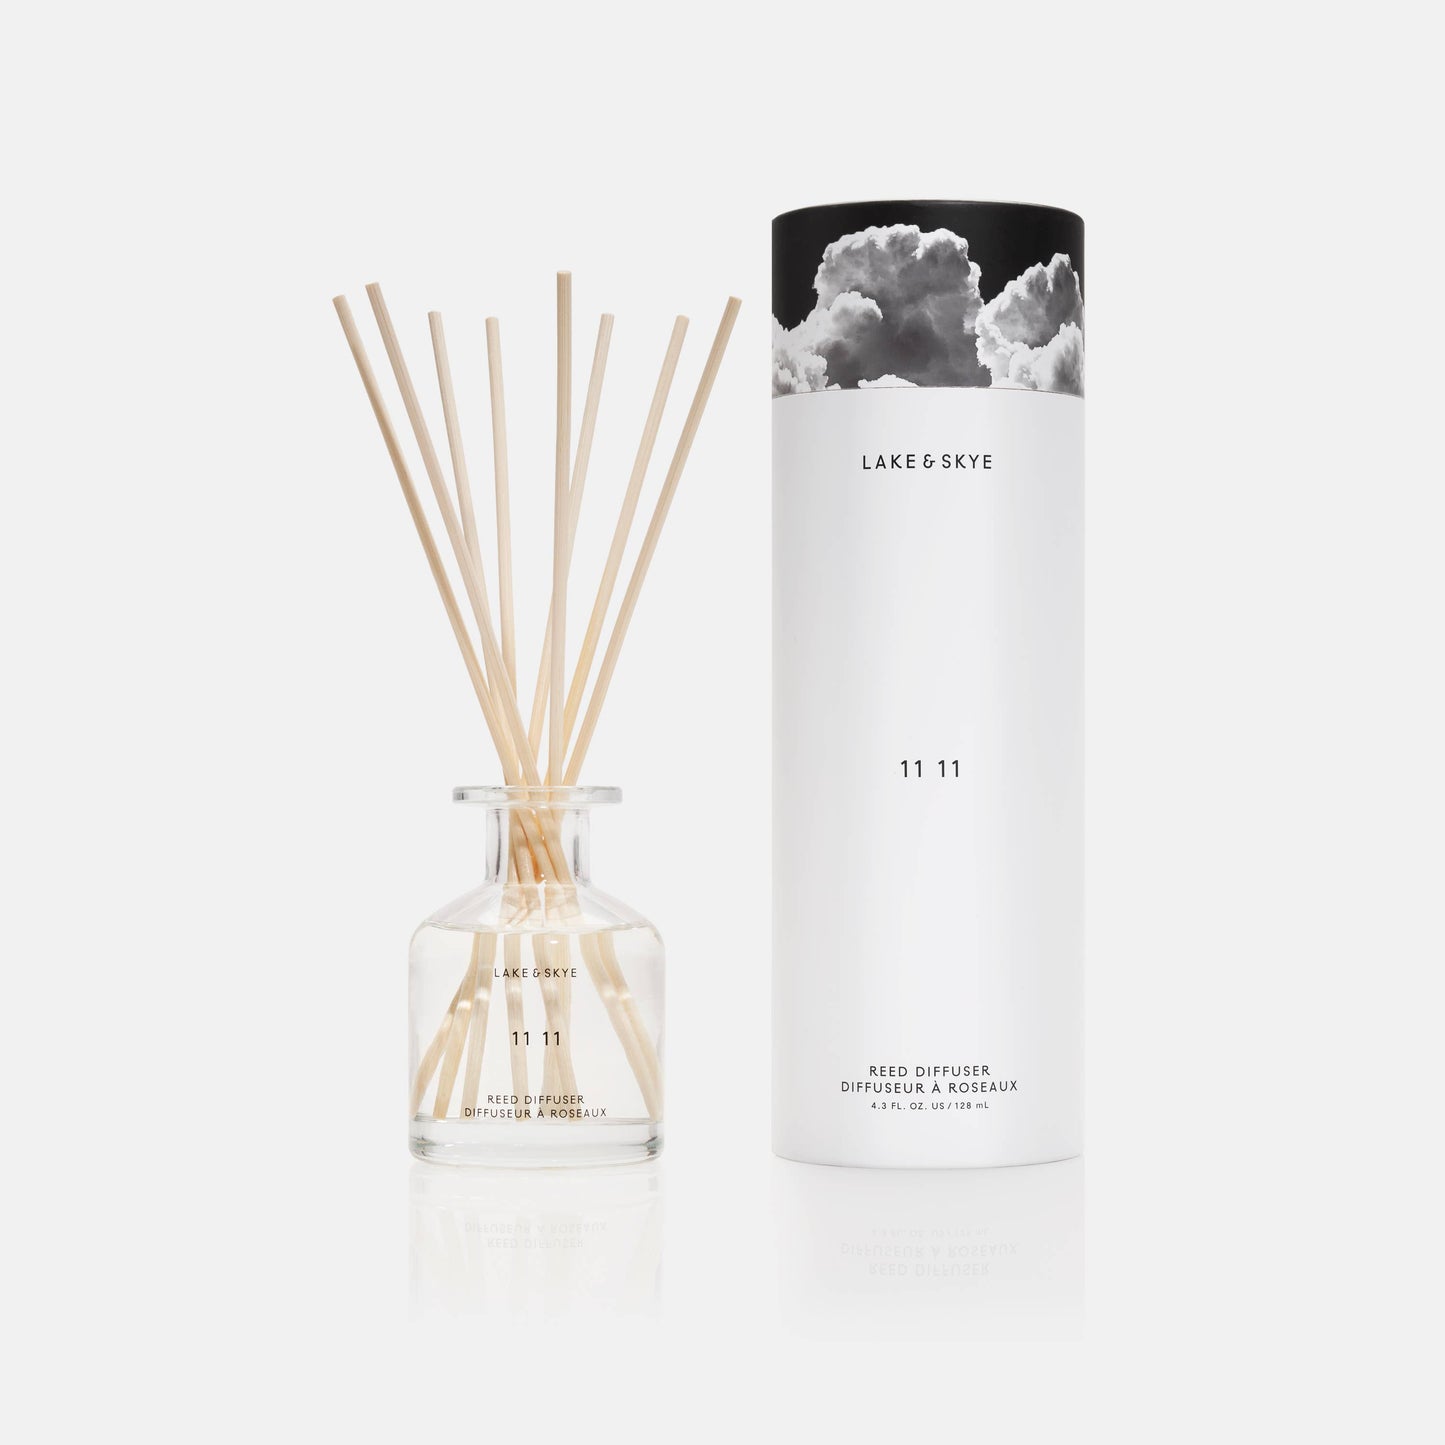 NEW! 11 11 Reed Diffuser